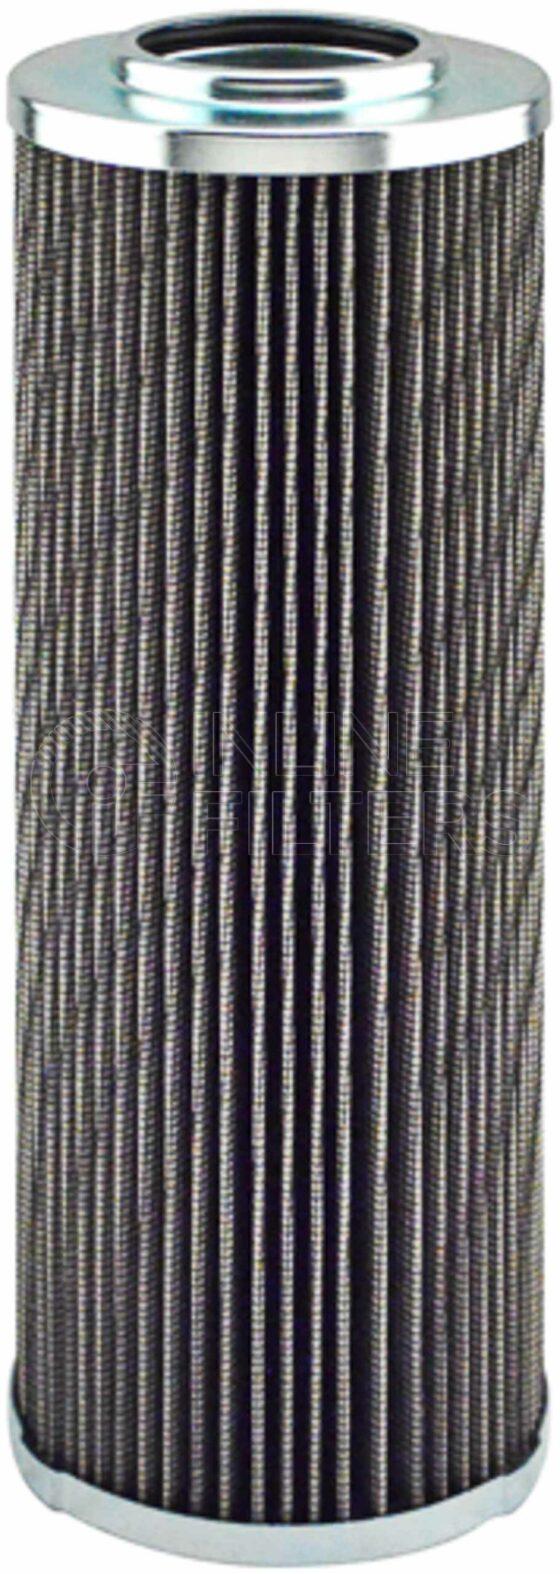 Baldwin PT23026. Baldwin – Hydraulic Filter Elements – PT23026 Baldwin hydraulic elements offer superior protection for your engine-powered equipment. Inside Diameter 1 1/2 (38.1) One End Compatible Competitor Part Number MP Filtri HP3202M60NA; Filtrec D151T60A Product Type Hydraulic Element Length 9 3/16 (233.4) Outside Diameter 3 1/16 (77.8) Application MP Filtri Applications Brand Baldwin Division Engine Mobile […]